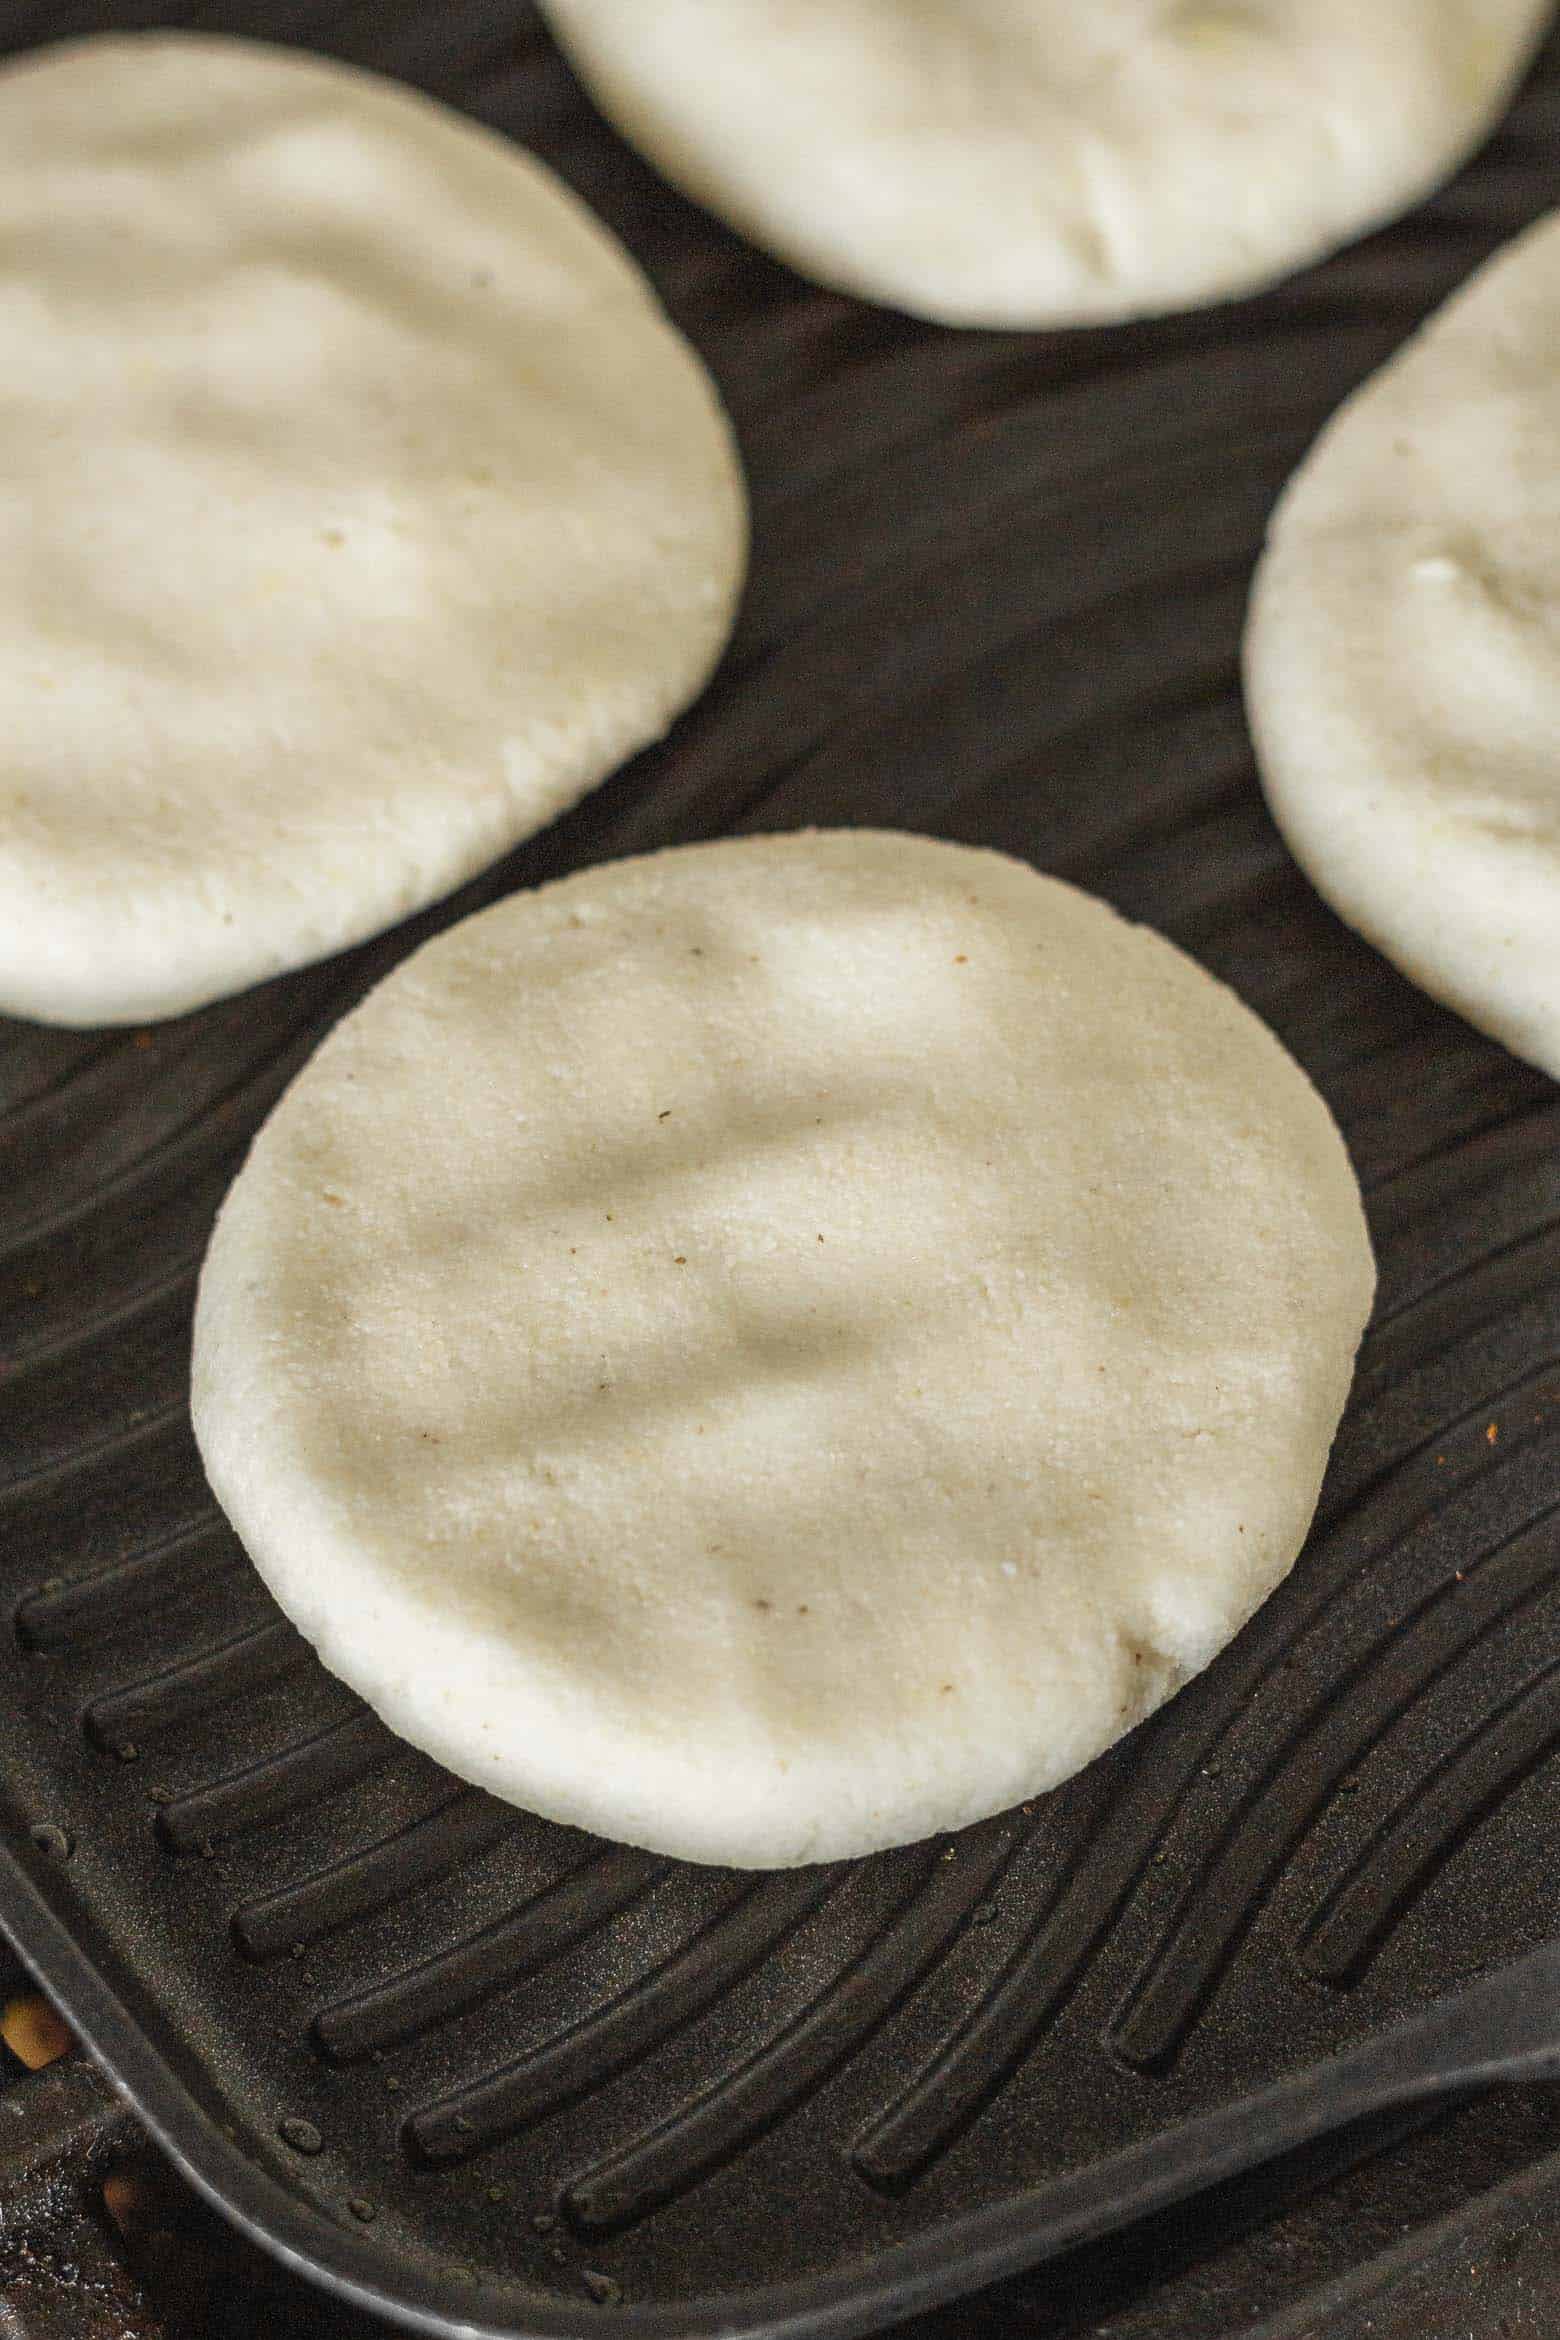 Uncooked arepas on a grill